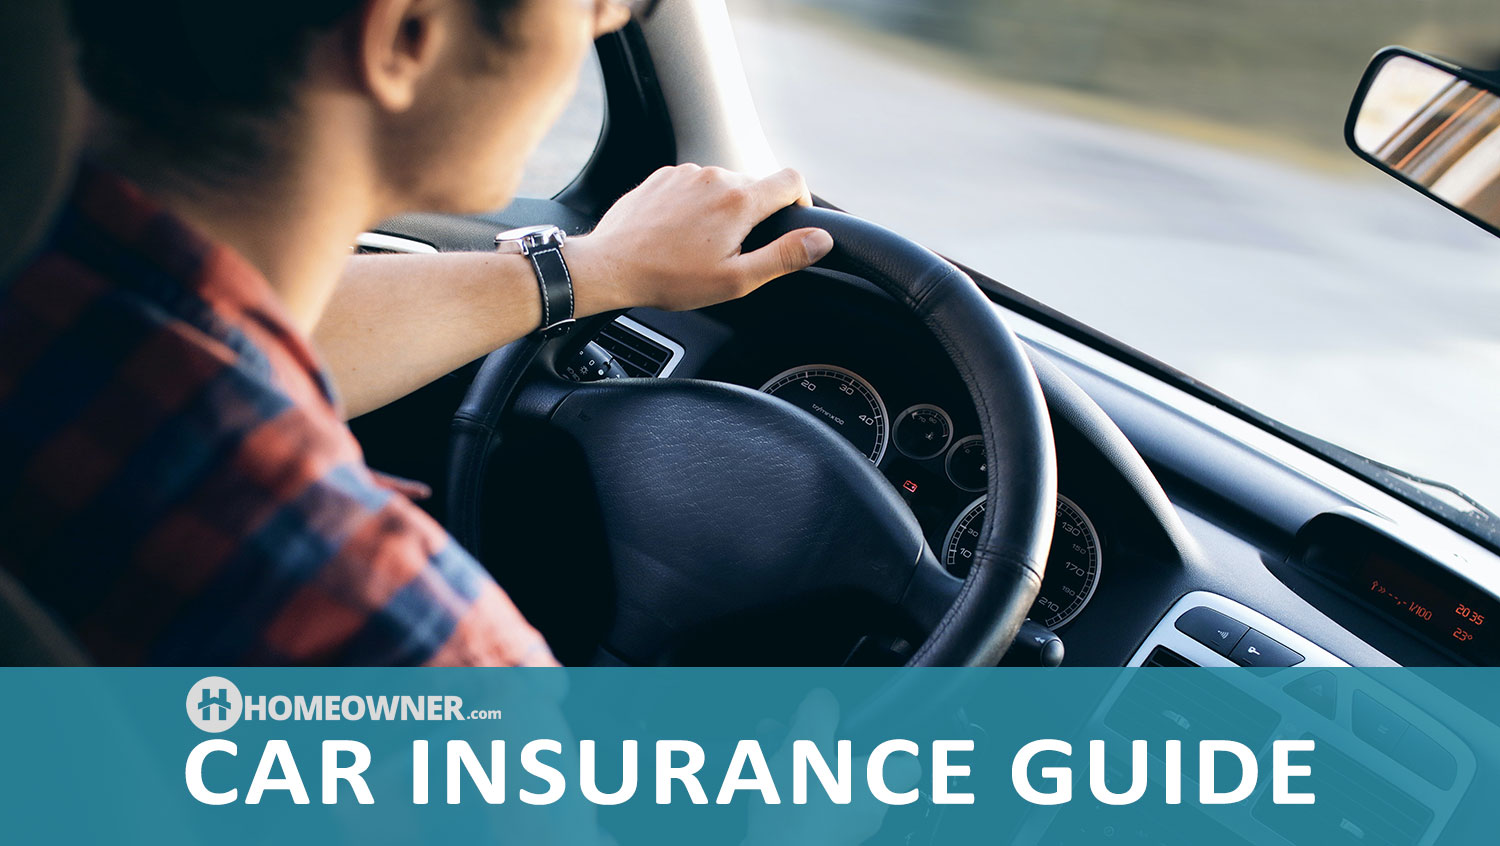 Auto Insurance Guide: 10 Types of Car Insurance